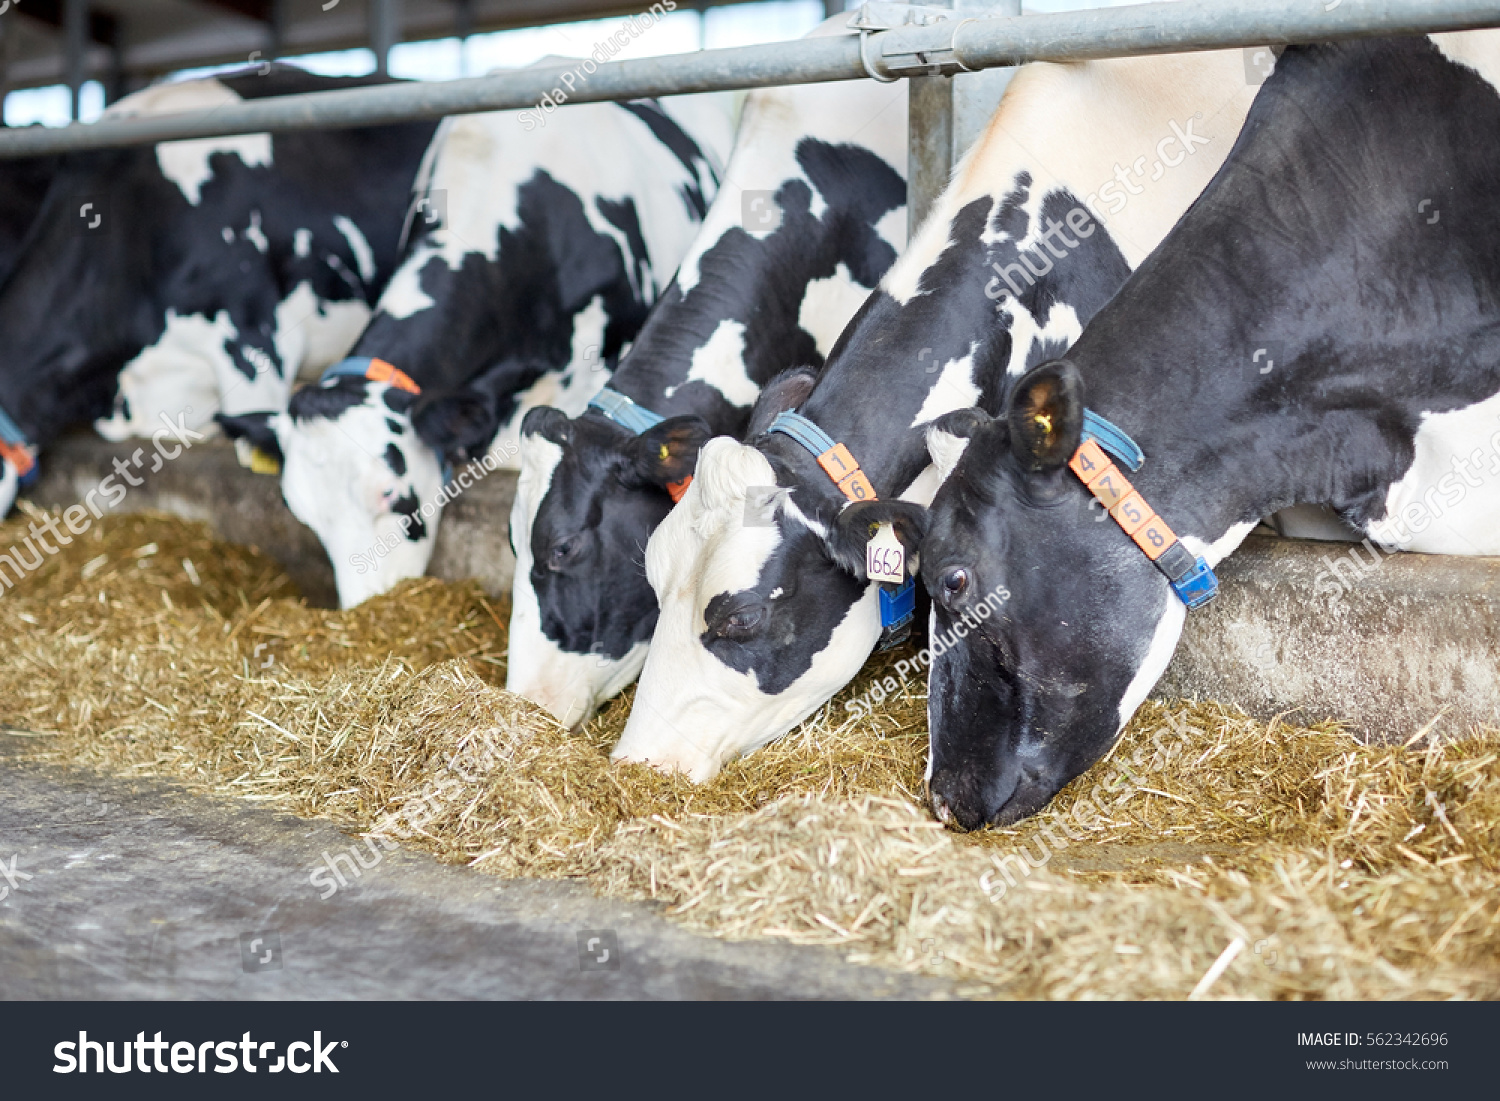 agriculture industry, farming and animal husbandry concept - herd of cows eating hay in cowshed on dairy farm #562342696